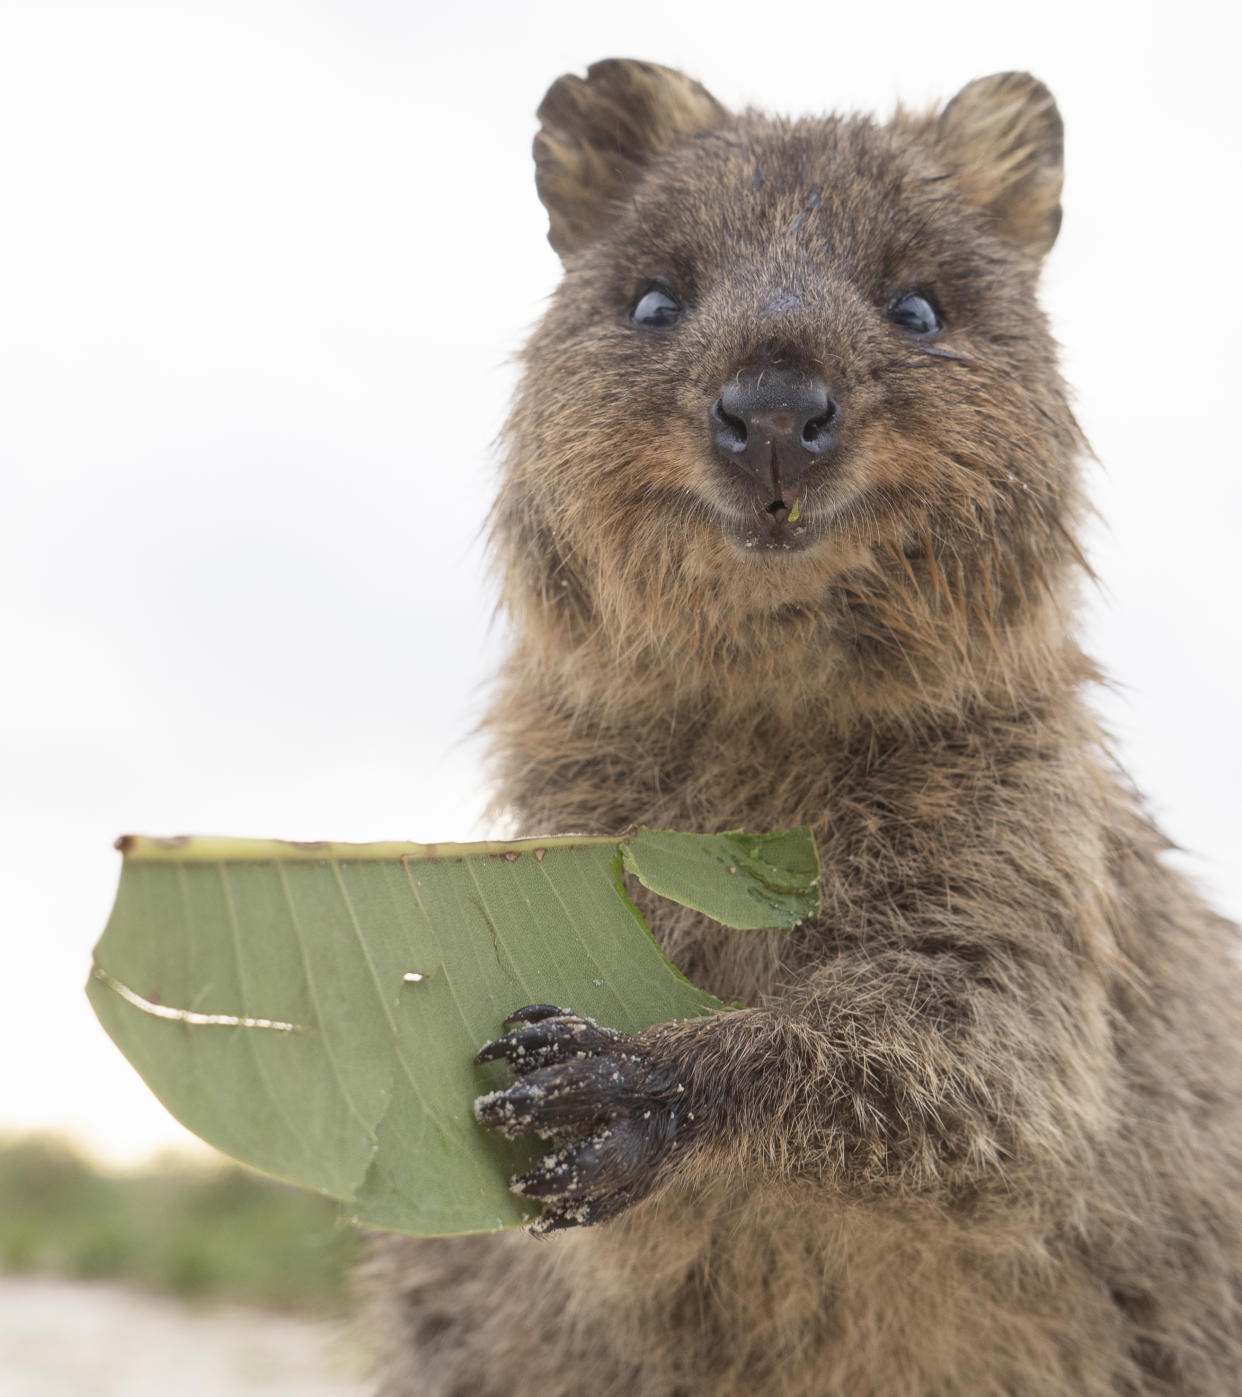 https://www.gettyimages.co.uk/detail/photo/quokka-the-happiest-animal-on-the-planet-rottnest-royalty-free-image/1420856675